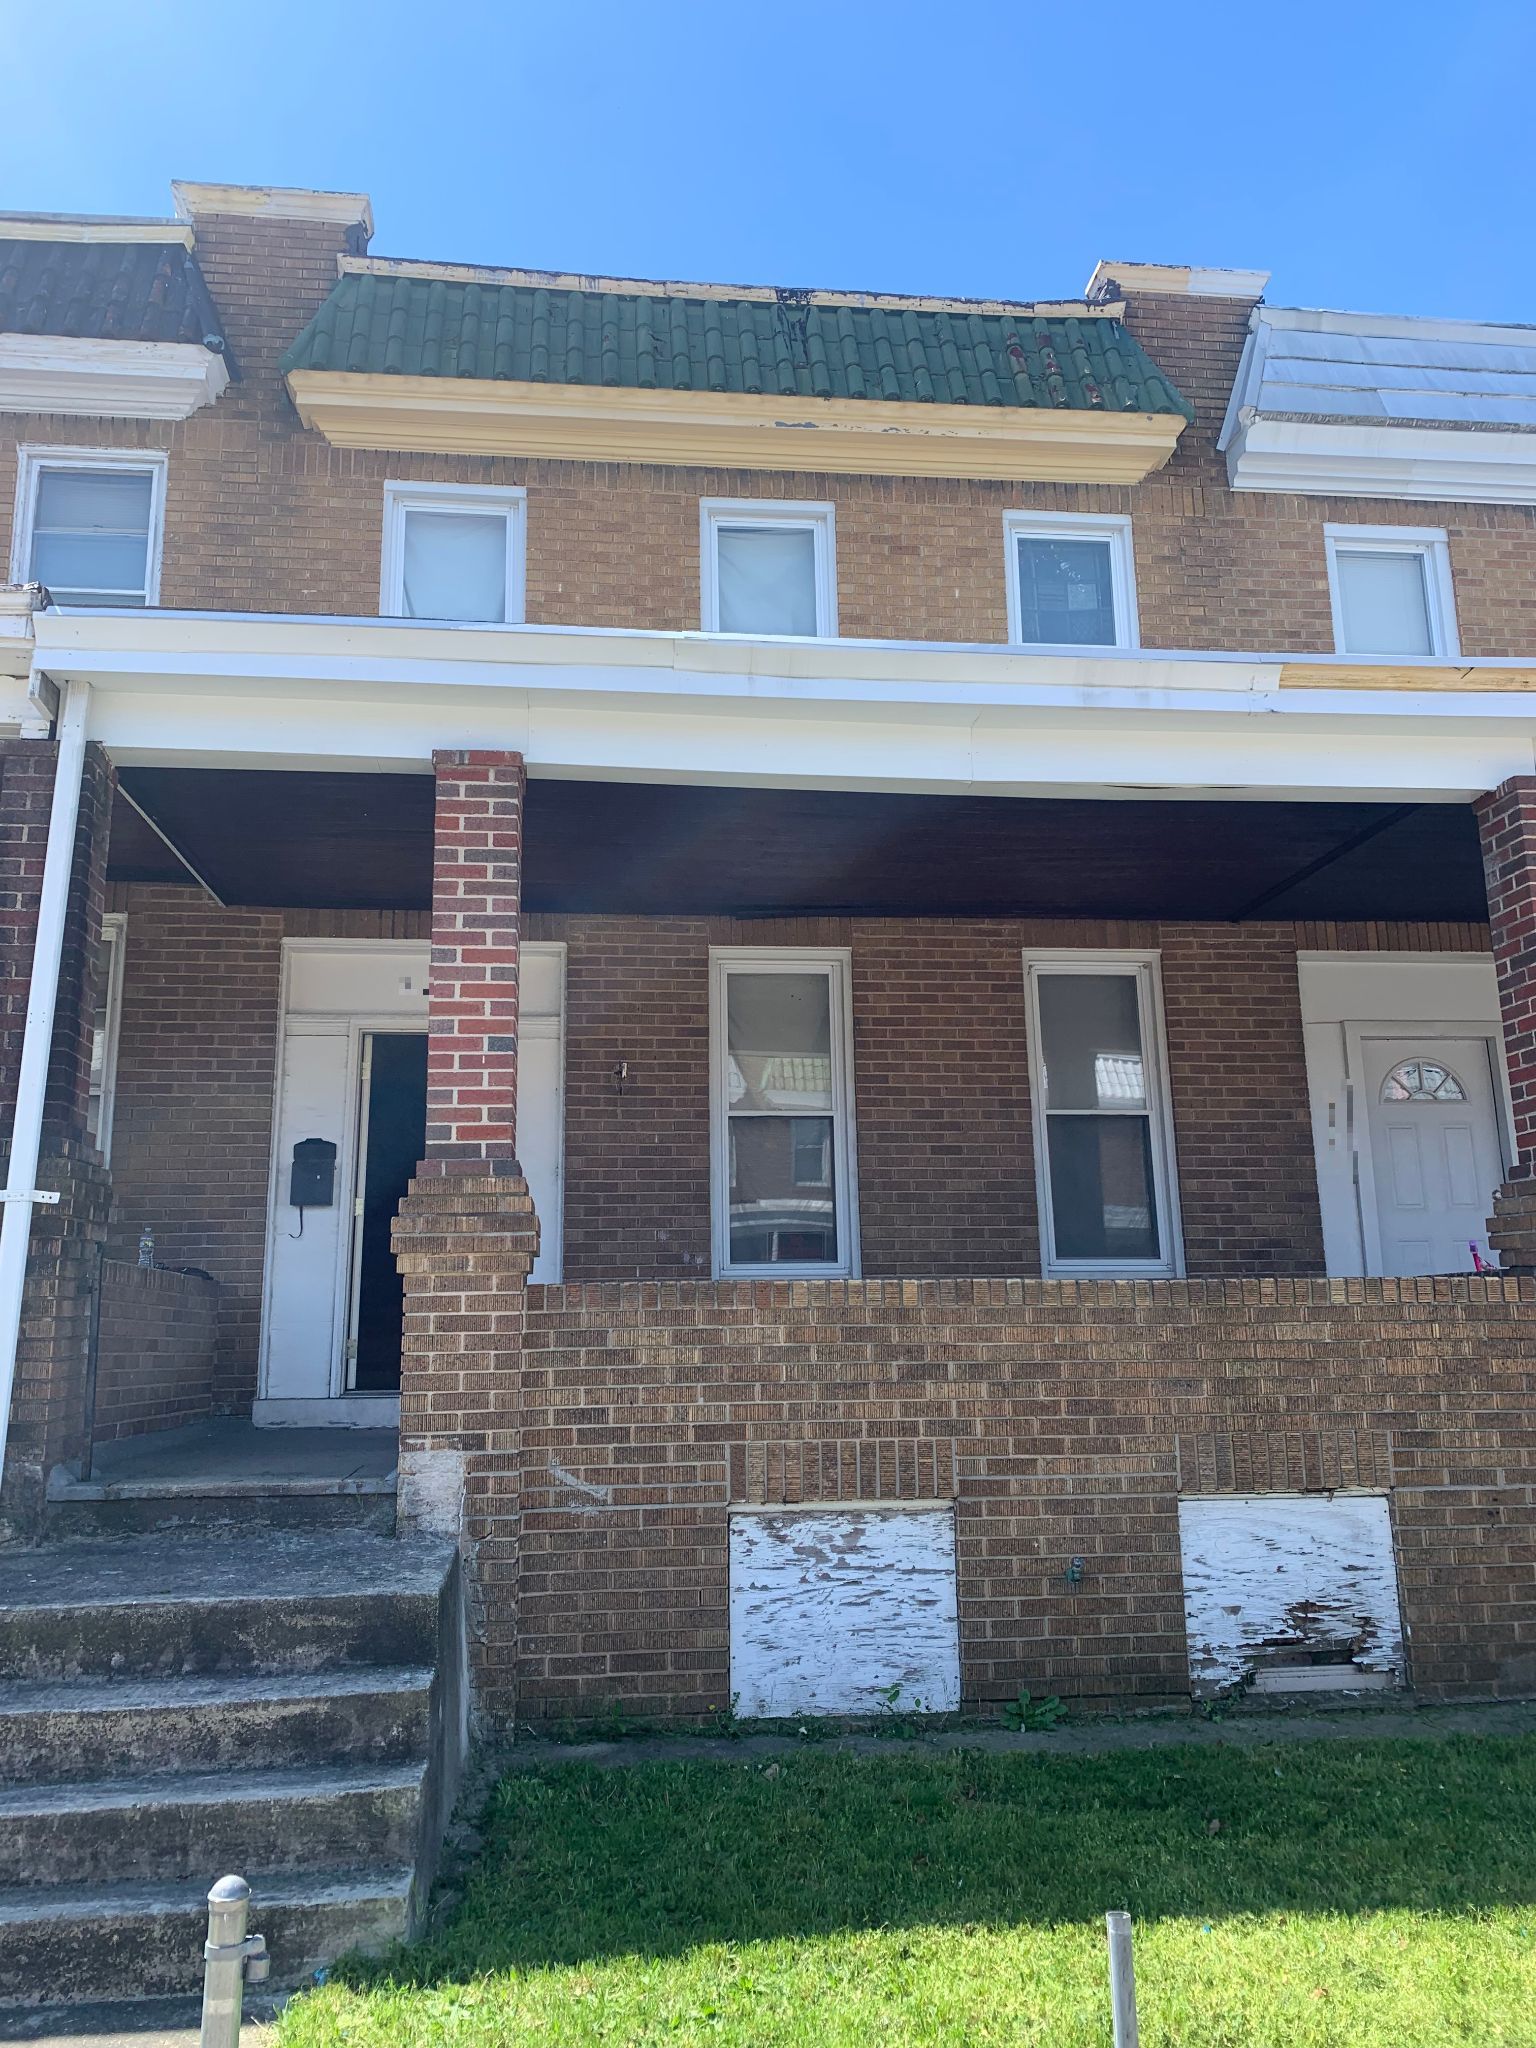 31XX Lawnview Ave, Baltimore, MD